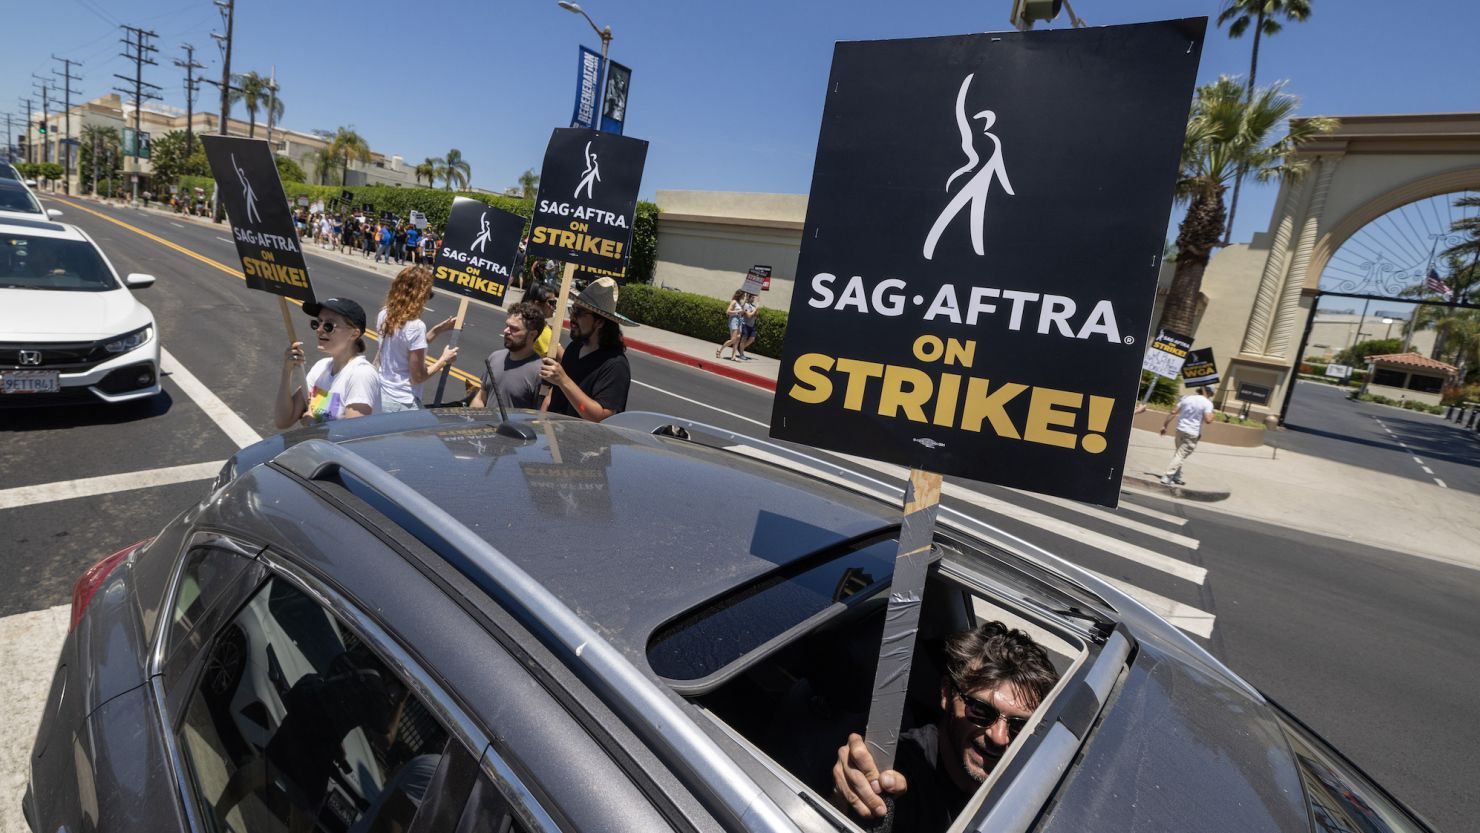 LOS ANGELES, CALIFORNIA - Members of the Hollywood actors SAG-AFTRA union walk a picket line with screen writers outside of Paramount Studios on the first day of the actors' strike which piles on top of the Hollywood writers WGA union strike. (Photo by David McNew/Getty Images)